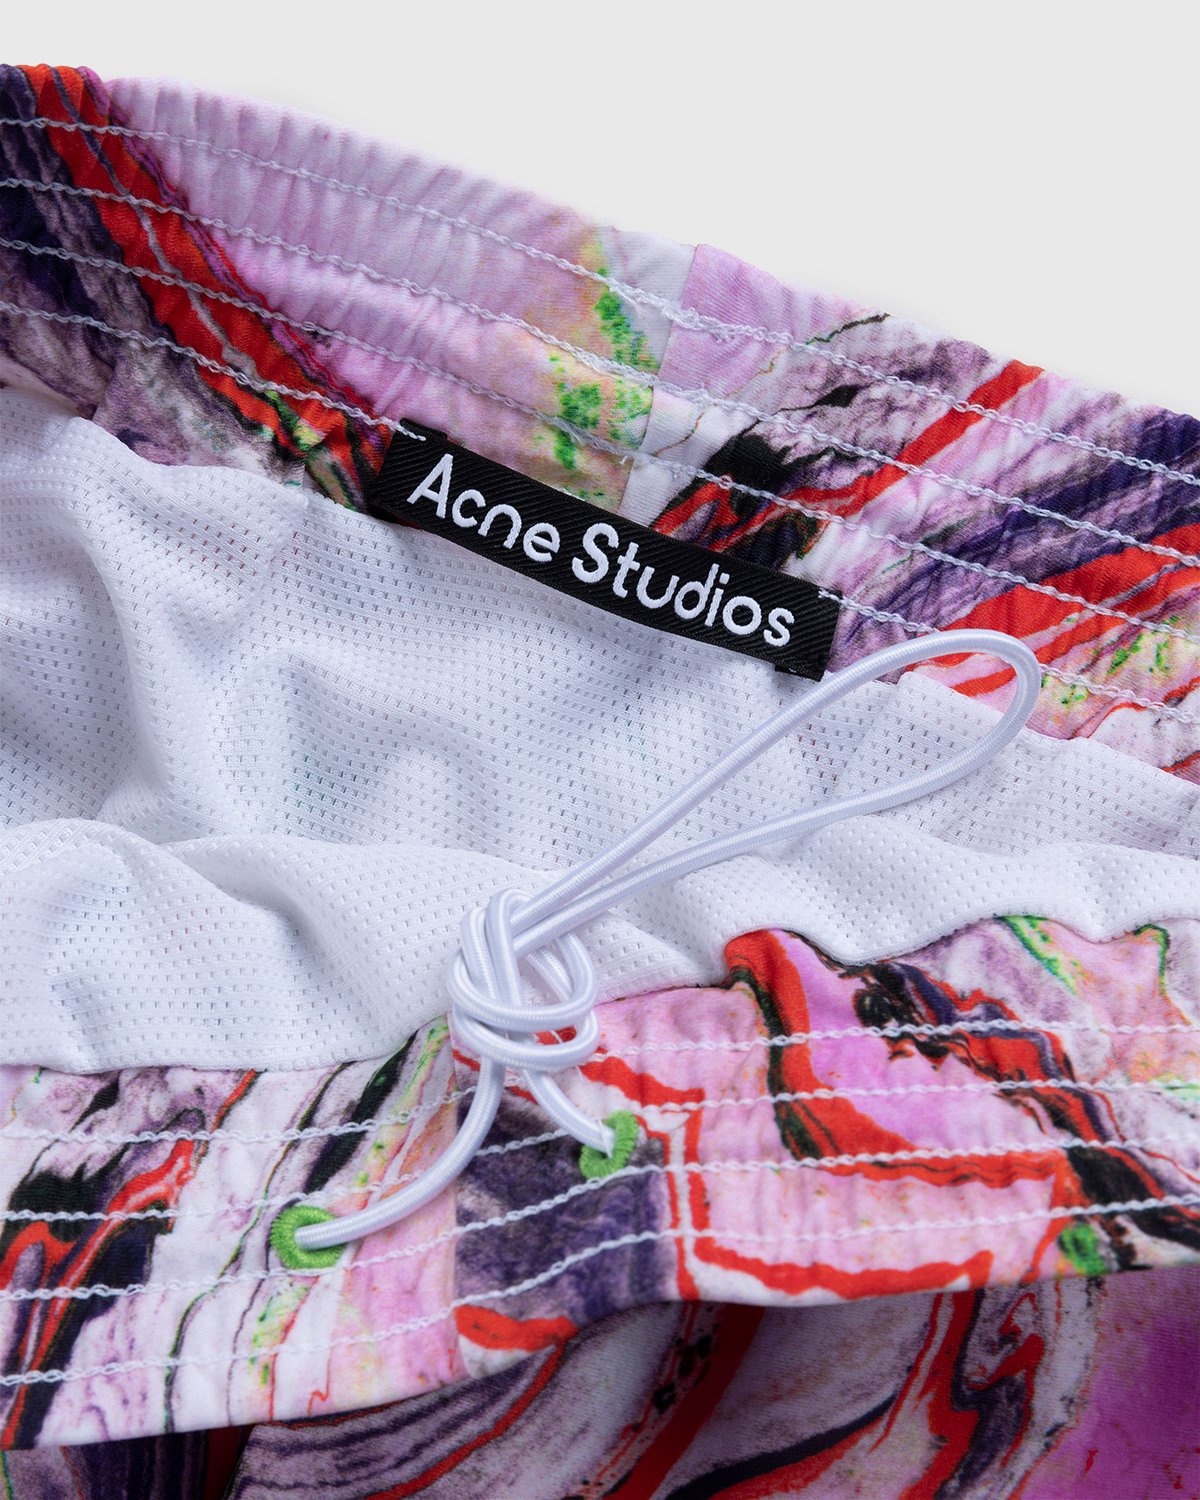 Acne Studios – Marble Swim Shorts Neon Red - Shorts - Red - Image 3